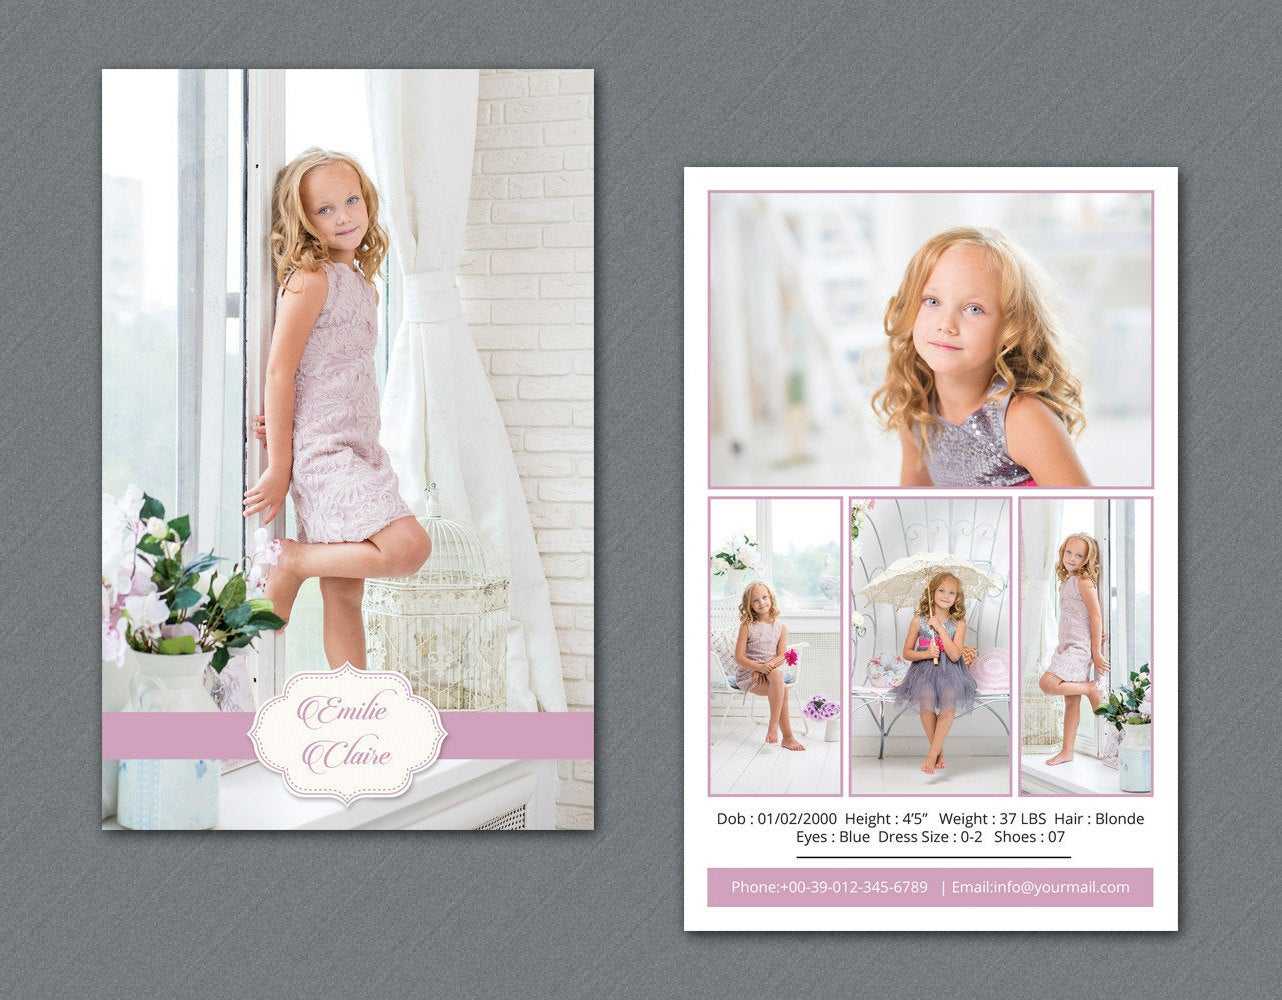 Comp Card Templates ] – On Sale Model Comp Card Photoshop Intended For Comp Card Template Psd